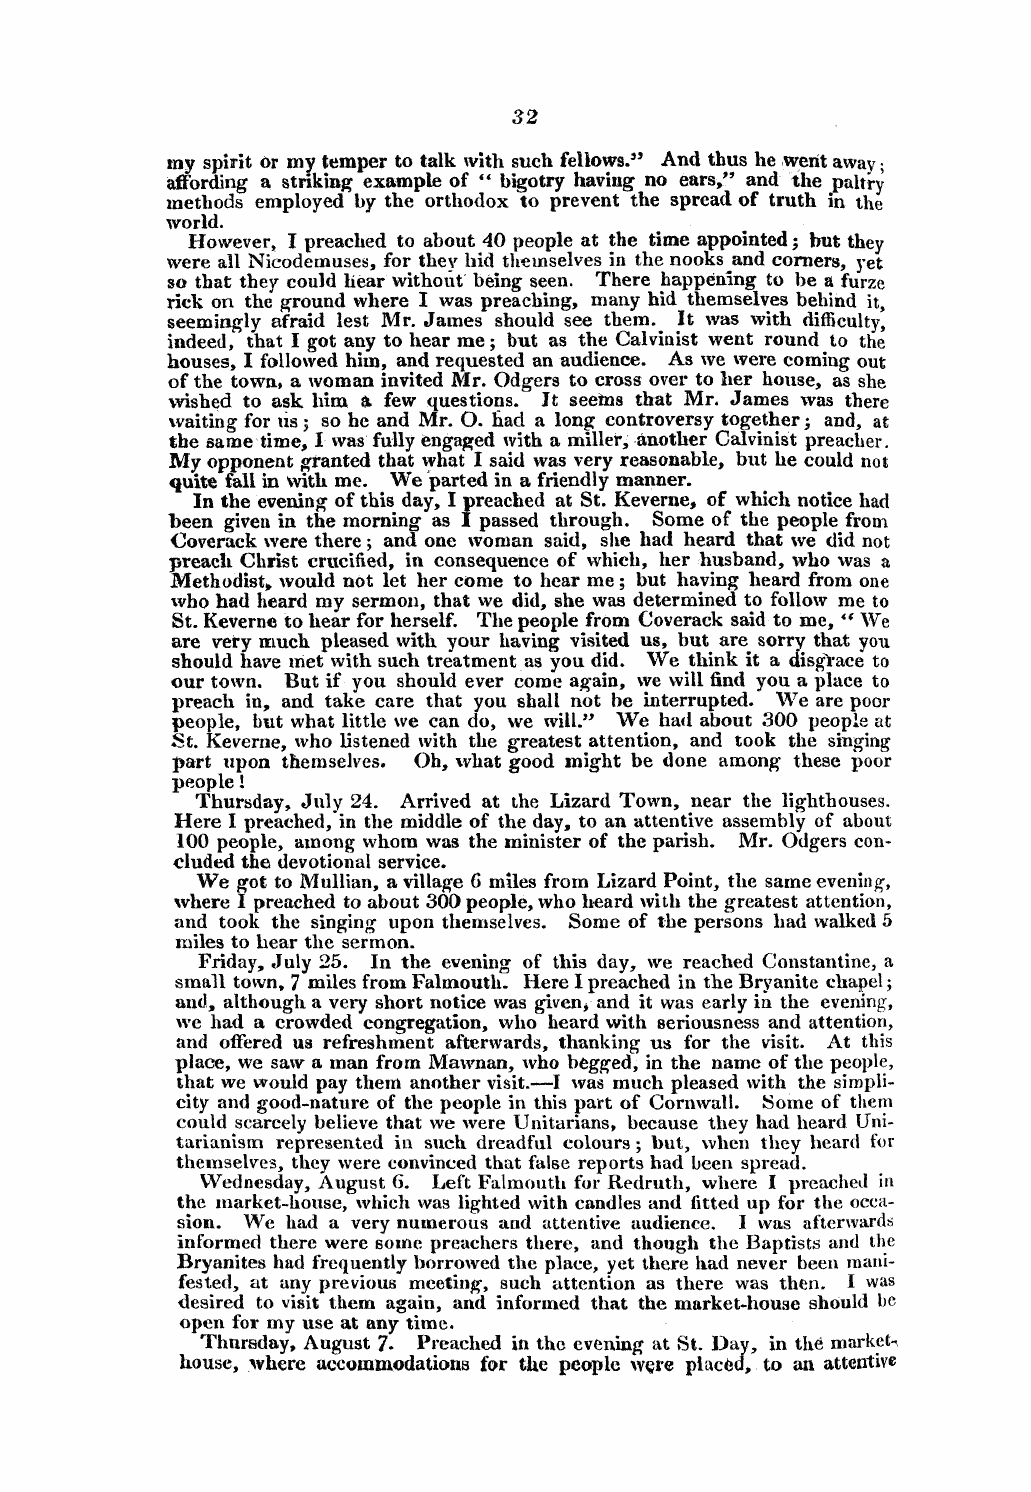 Monthly Repository (1806-1838) and Unitarian Chronicle (1832-1833): F Y, 1st edition, Supplement: 8